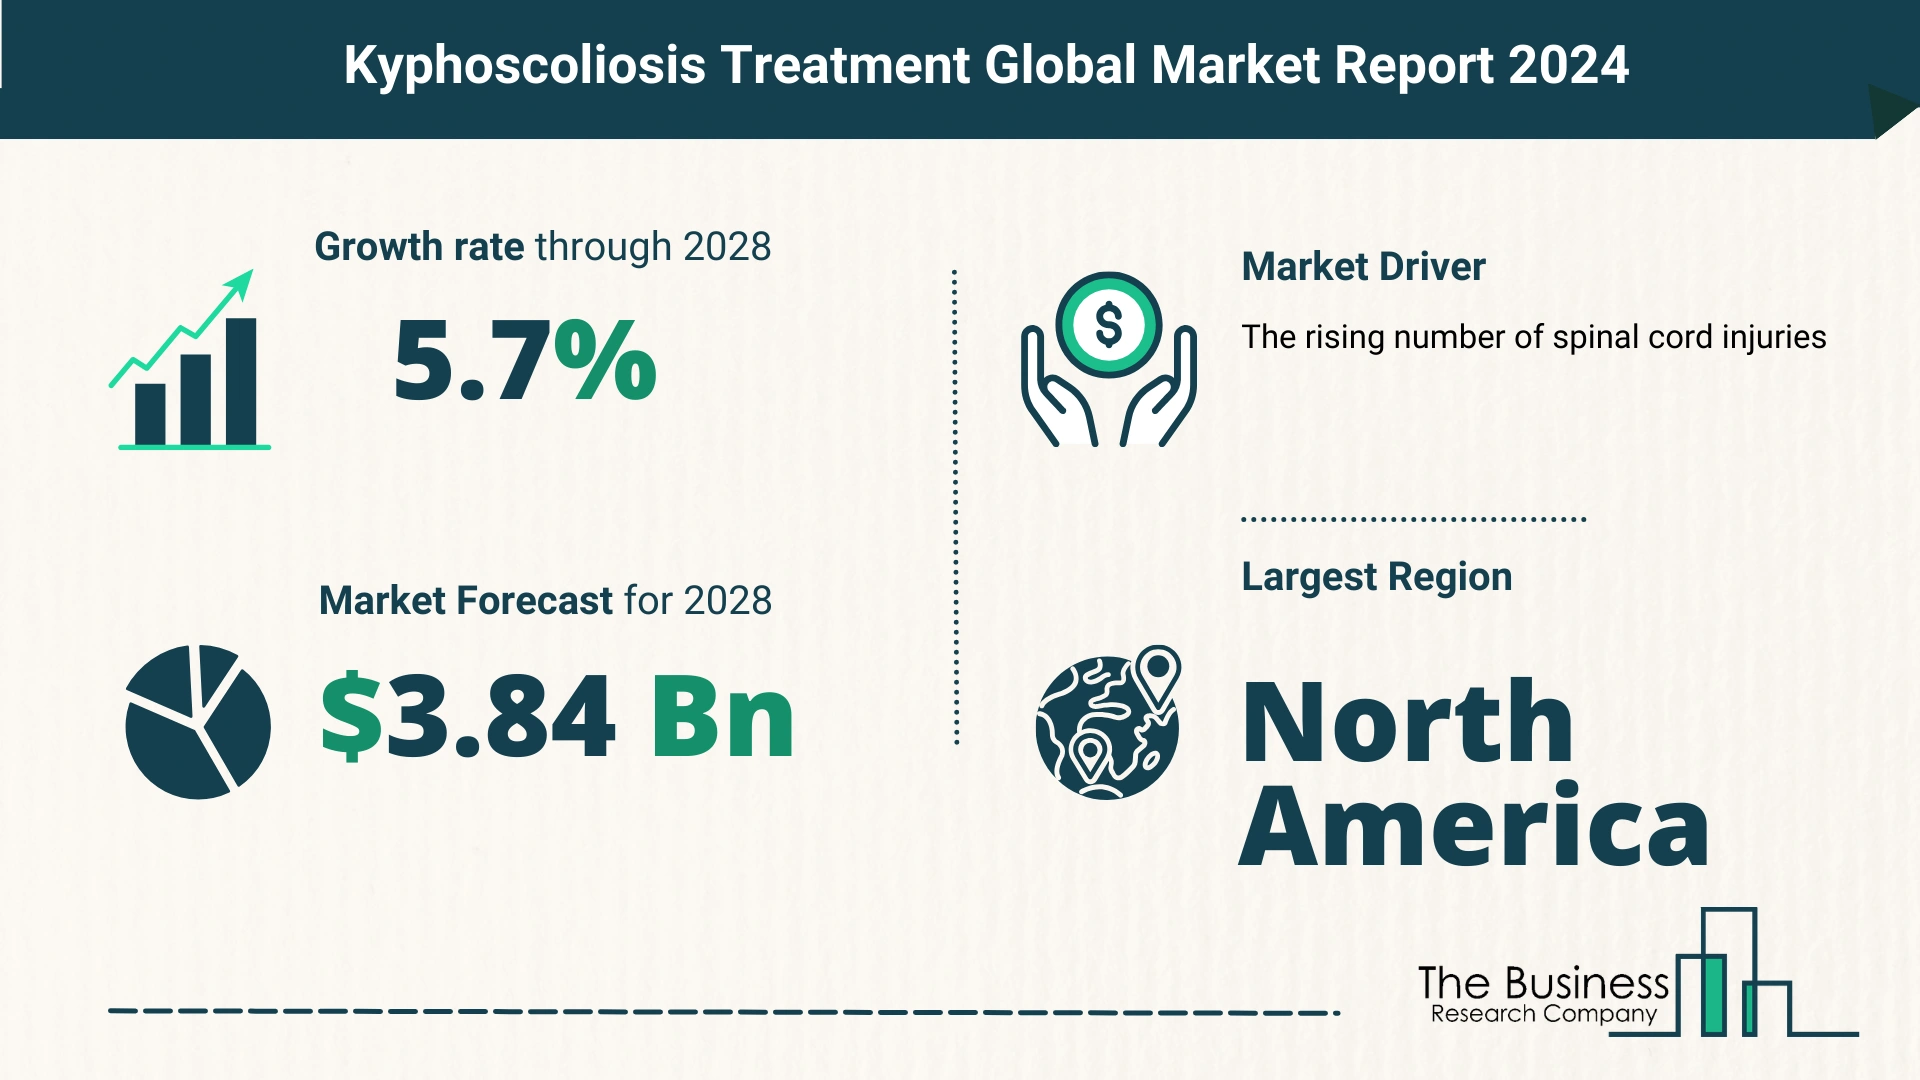 Key Trends And Drivers In The Kyphoscoliosis Treatment Market 2024